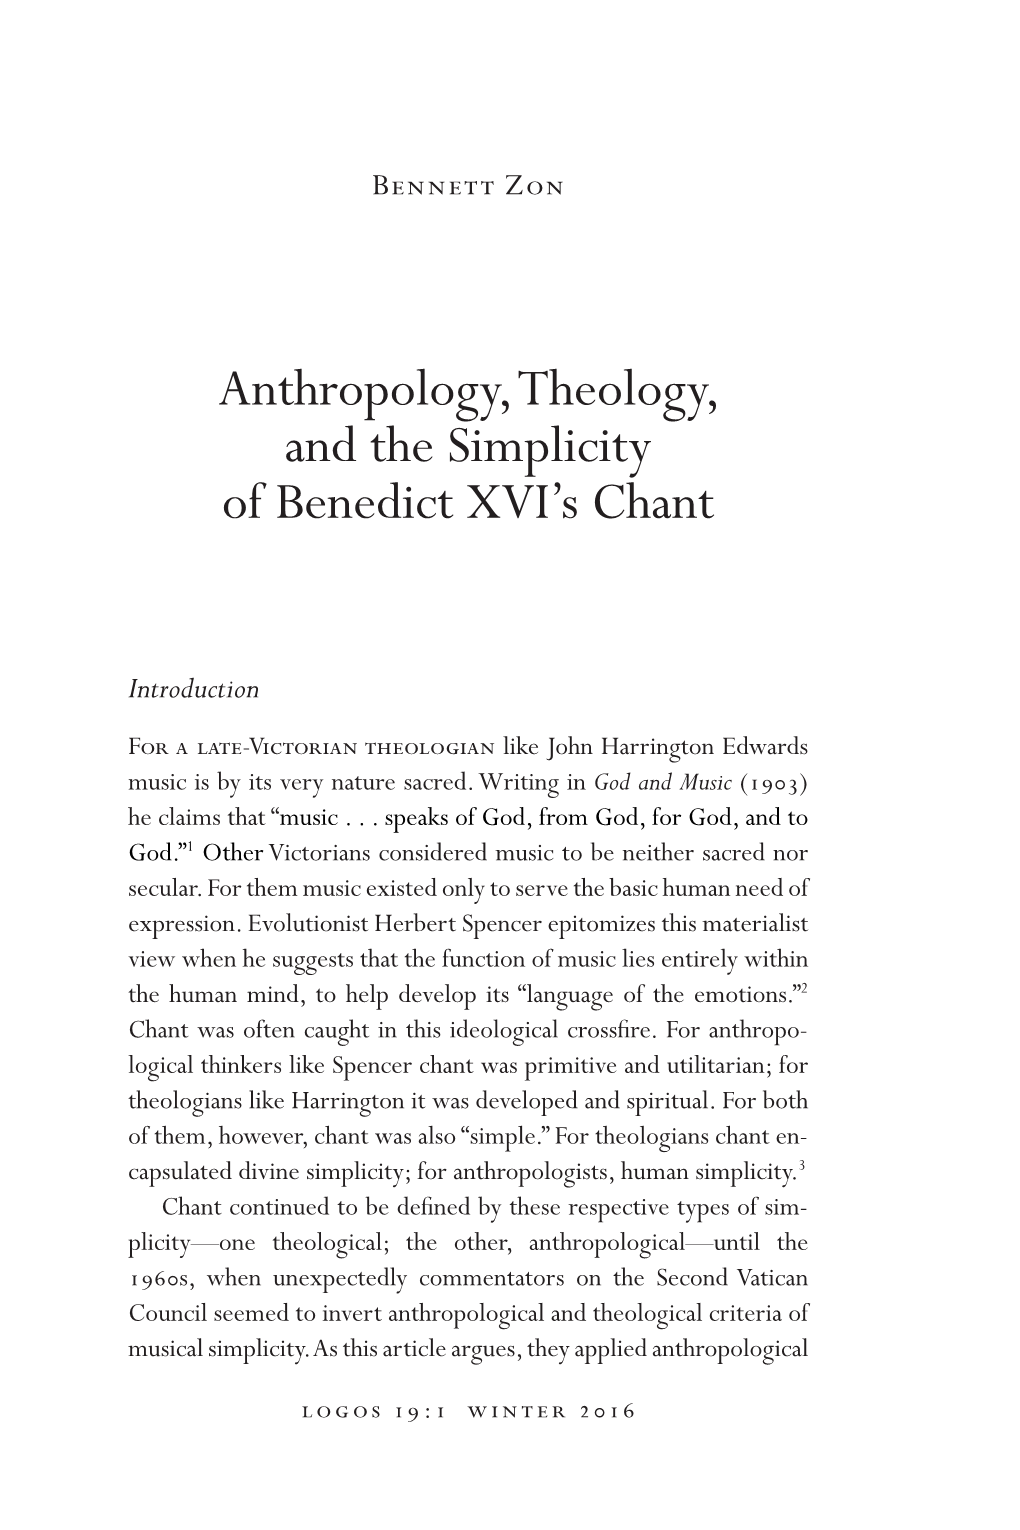 Anthropology, Theology, and the Simplicity of Benedict XVI's Chant